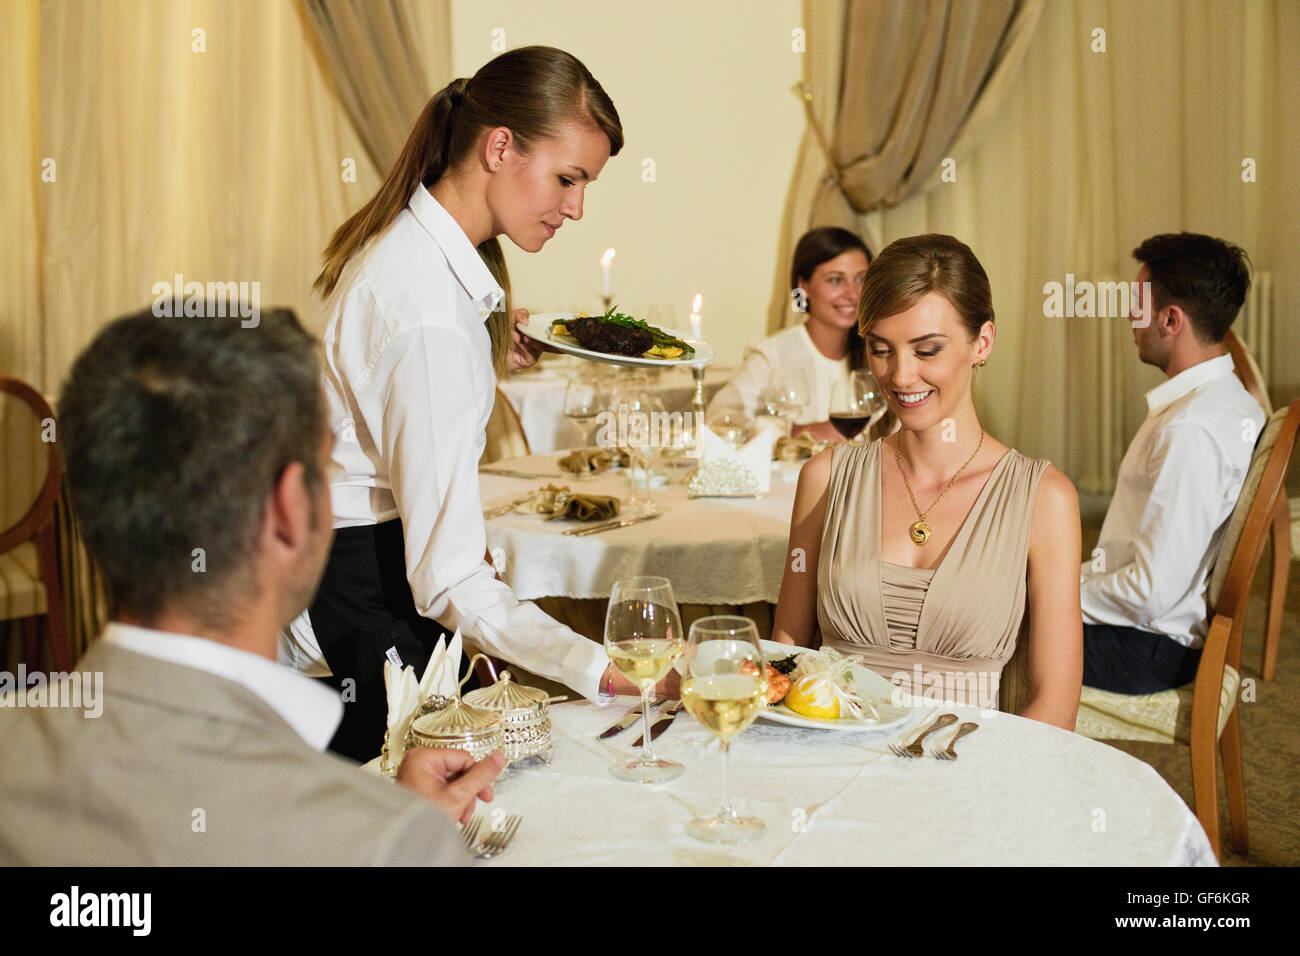 Waitress Serving Food To Man And Woman In Restaurant Stock Photo Alamy